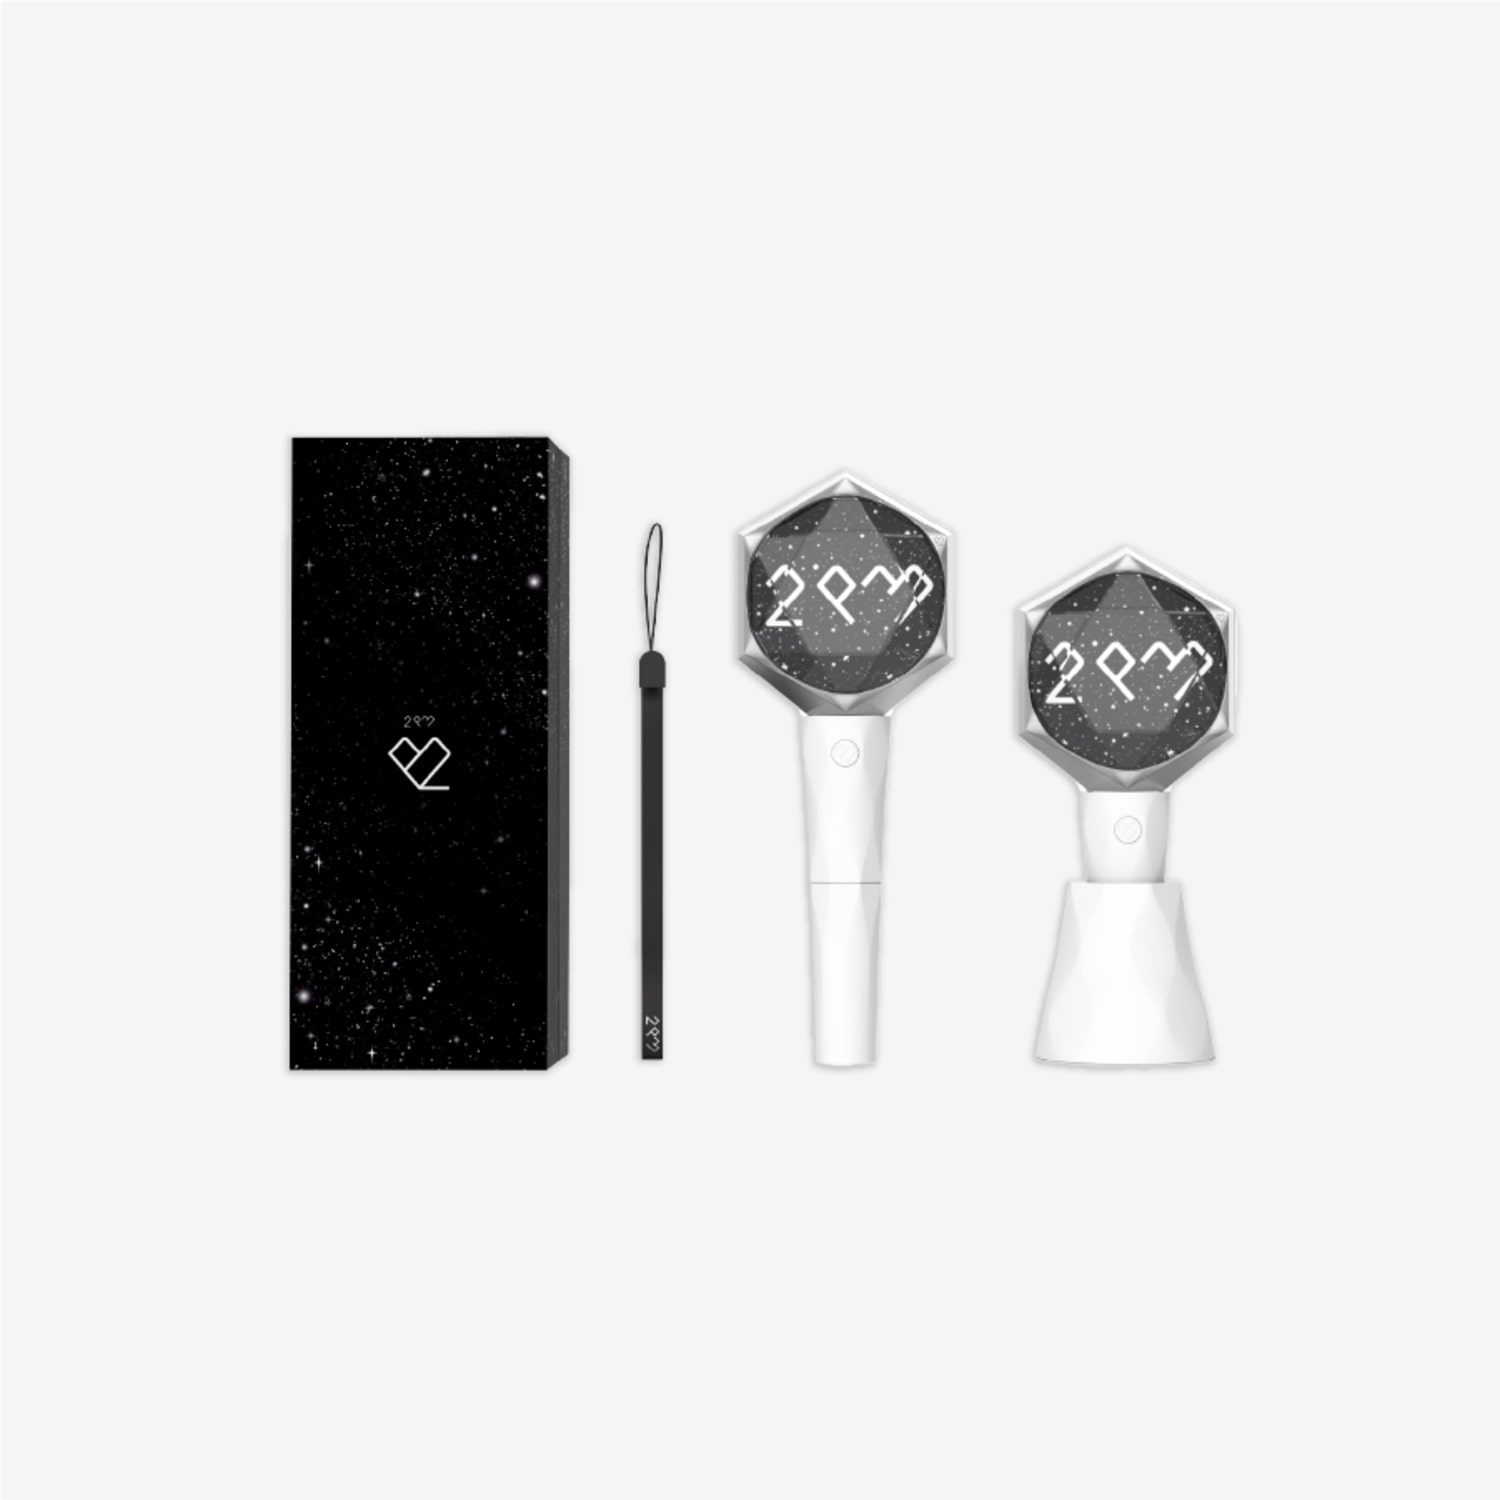 2PM 이준호(LEE JUNHO) [BEFORE MIDNIGHT] OFFICIAL MD - 2PM 공식 응원봉 2PM OFFICIAL LIGHT STICK